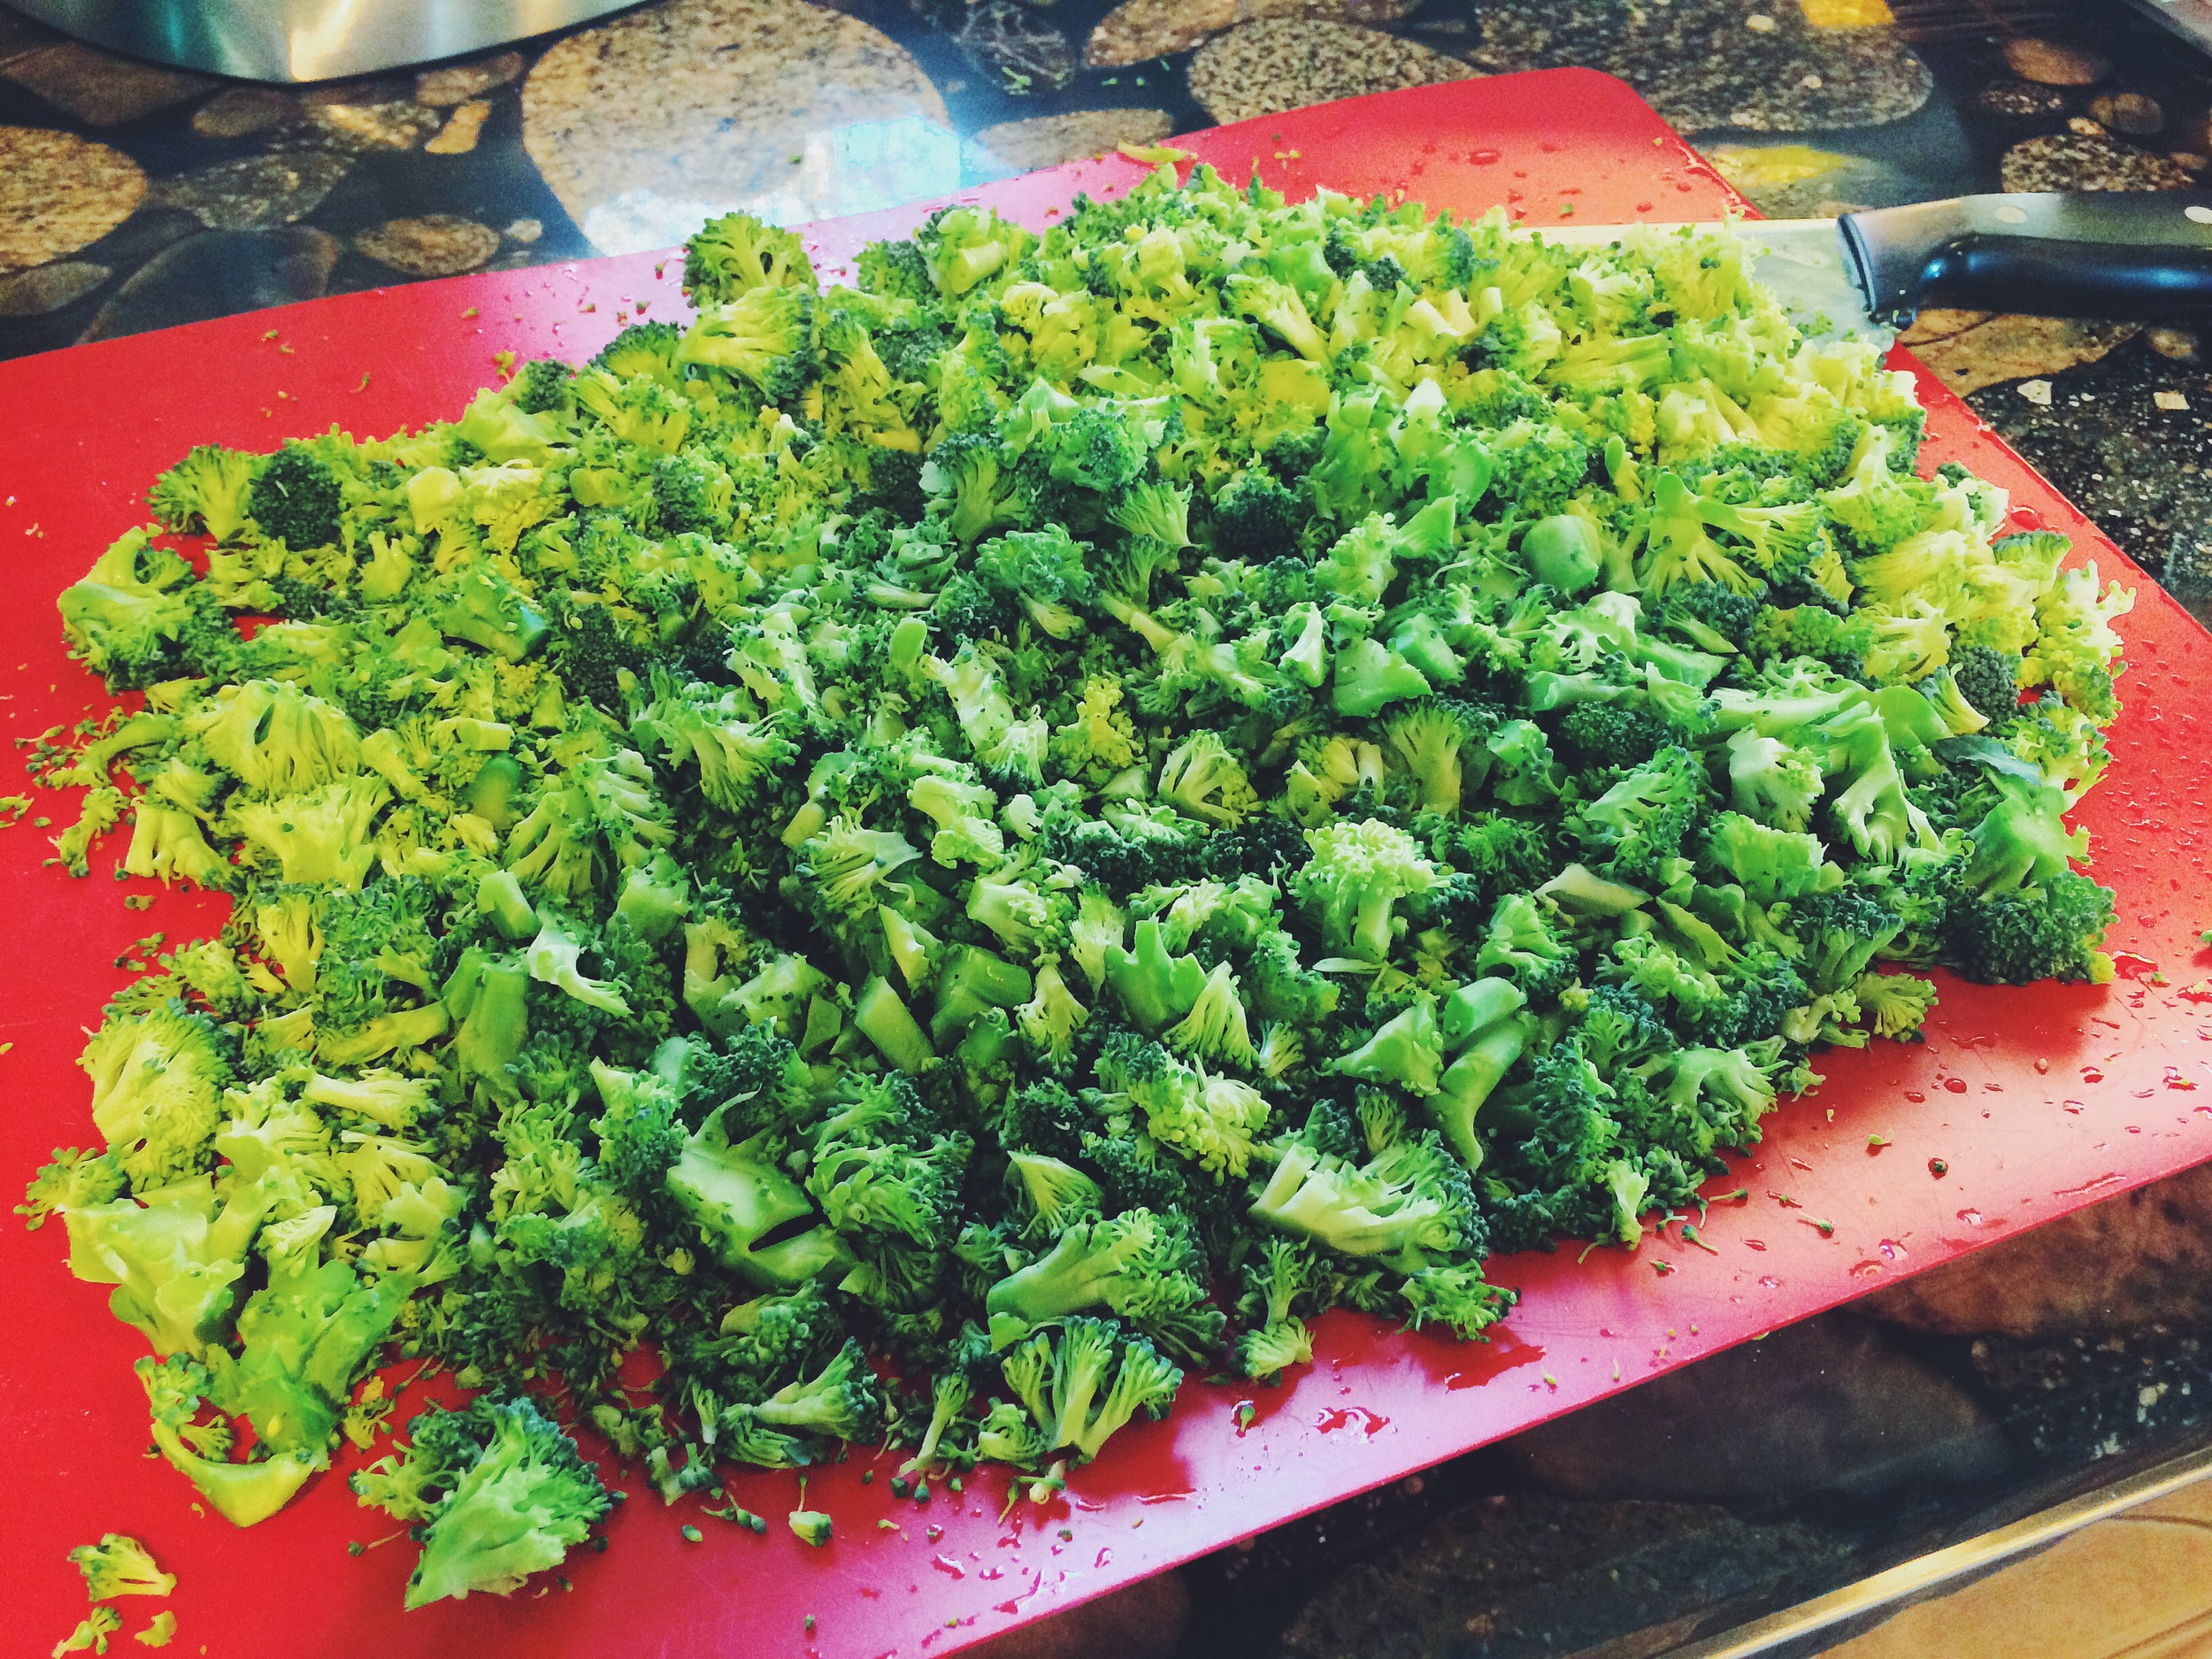   While the flour, butter, and&nbsp;onion are heating and combining. Chop the broccoli florets.&nbsp;  